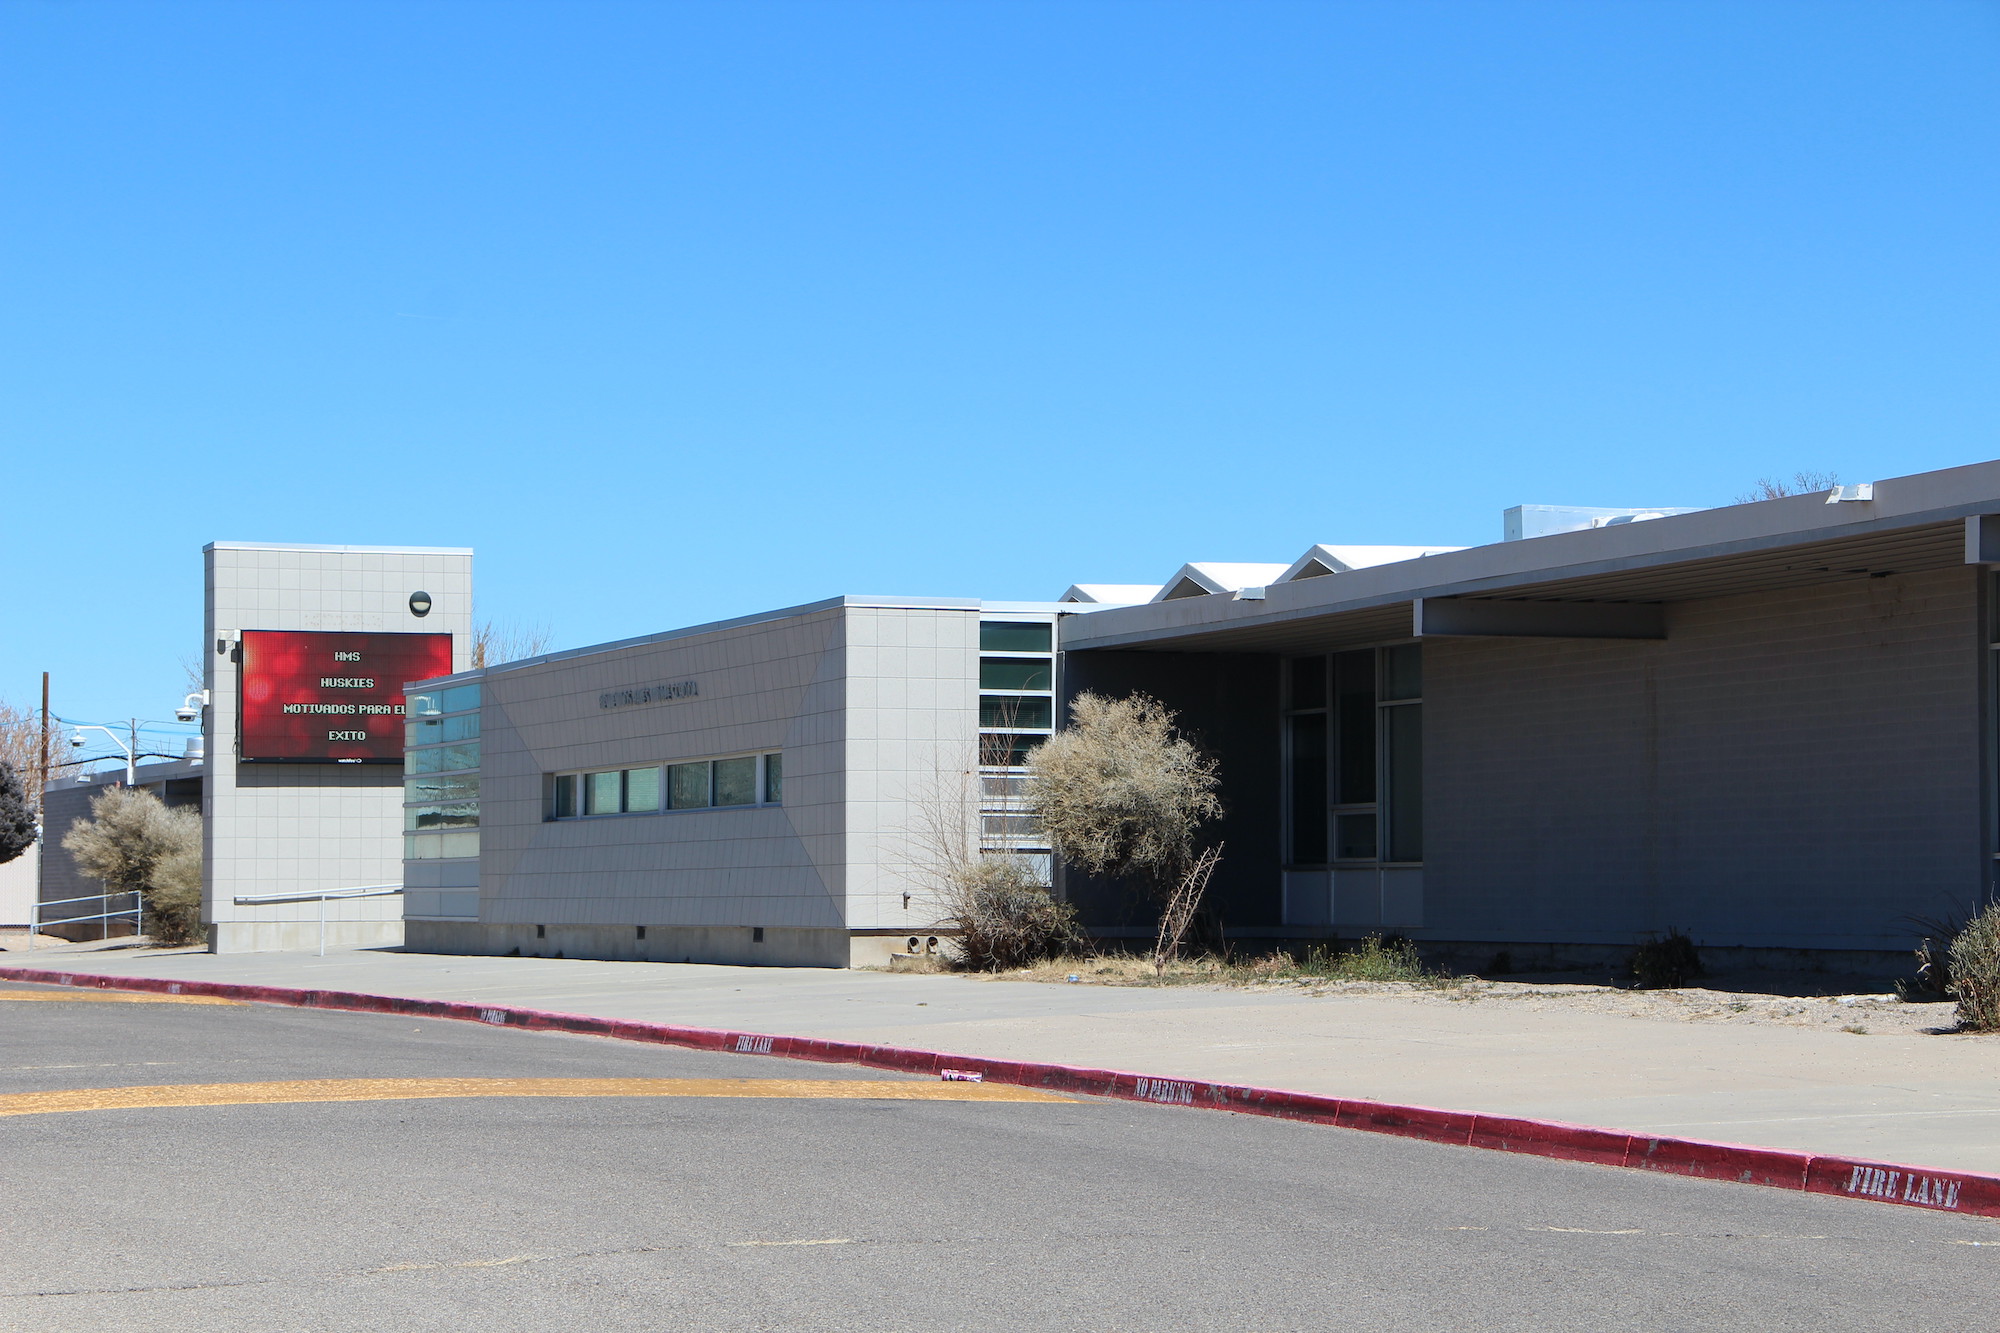 Picture of Hayes Middle School 1100 Texas St NE, Albuquerque, NM 87110